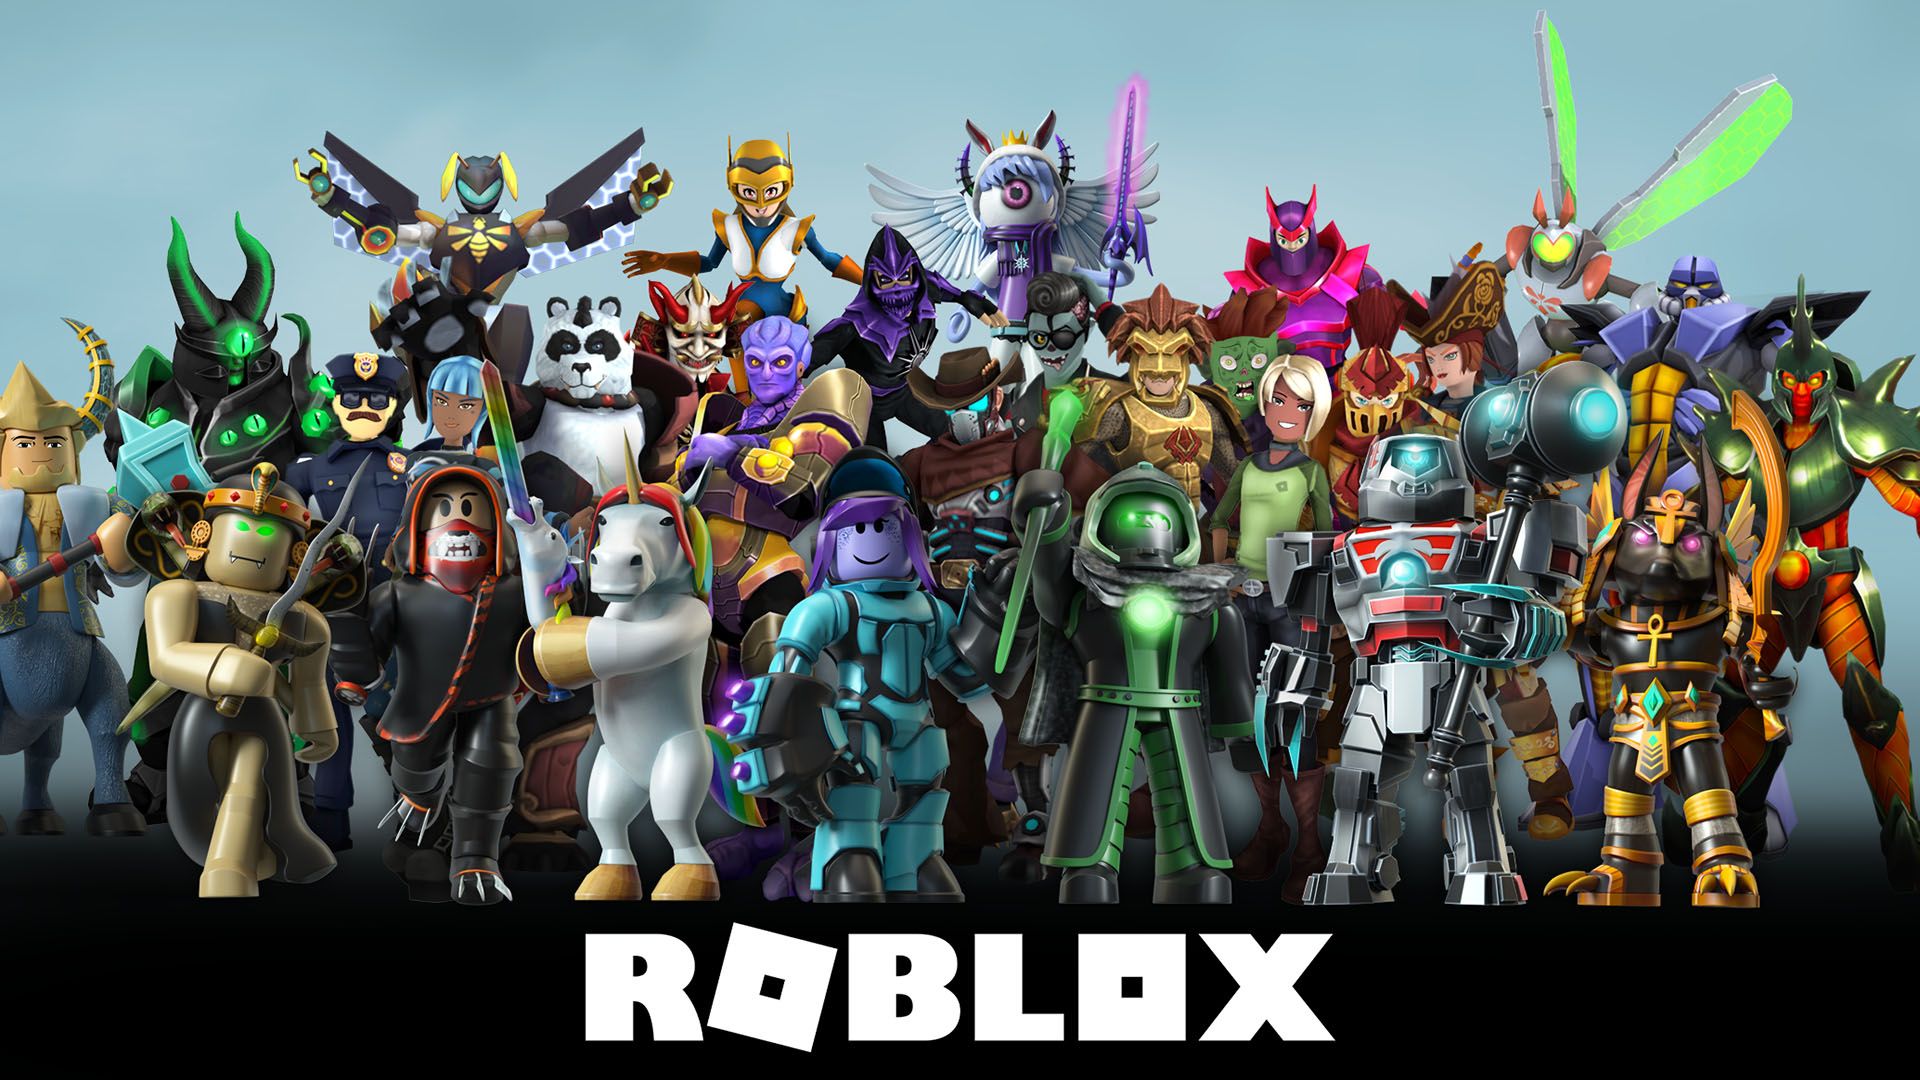 Rоblox 4k Wallpaper - Rblx Full 4k Wallpapers APK for Android Download